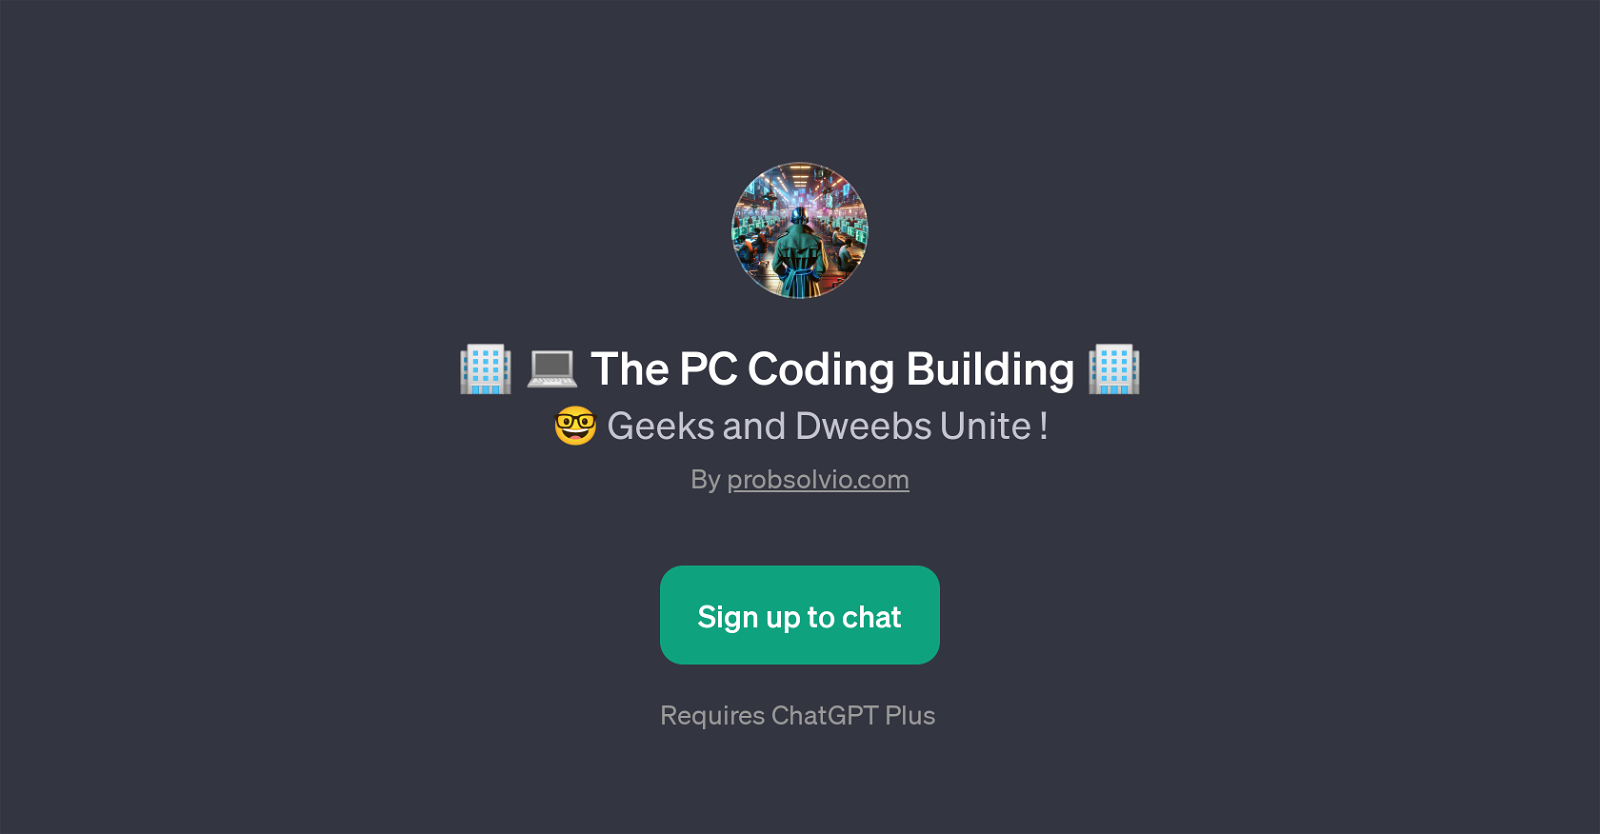 The PC Coding Building website